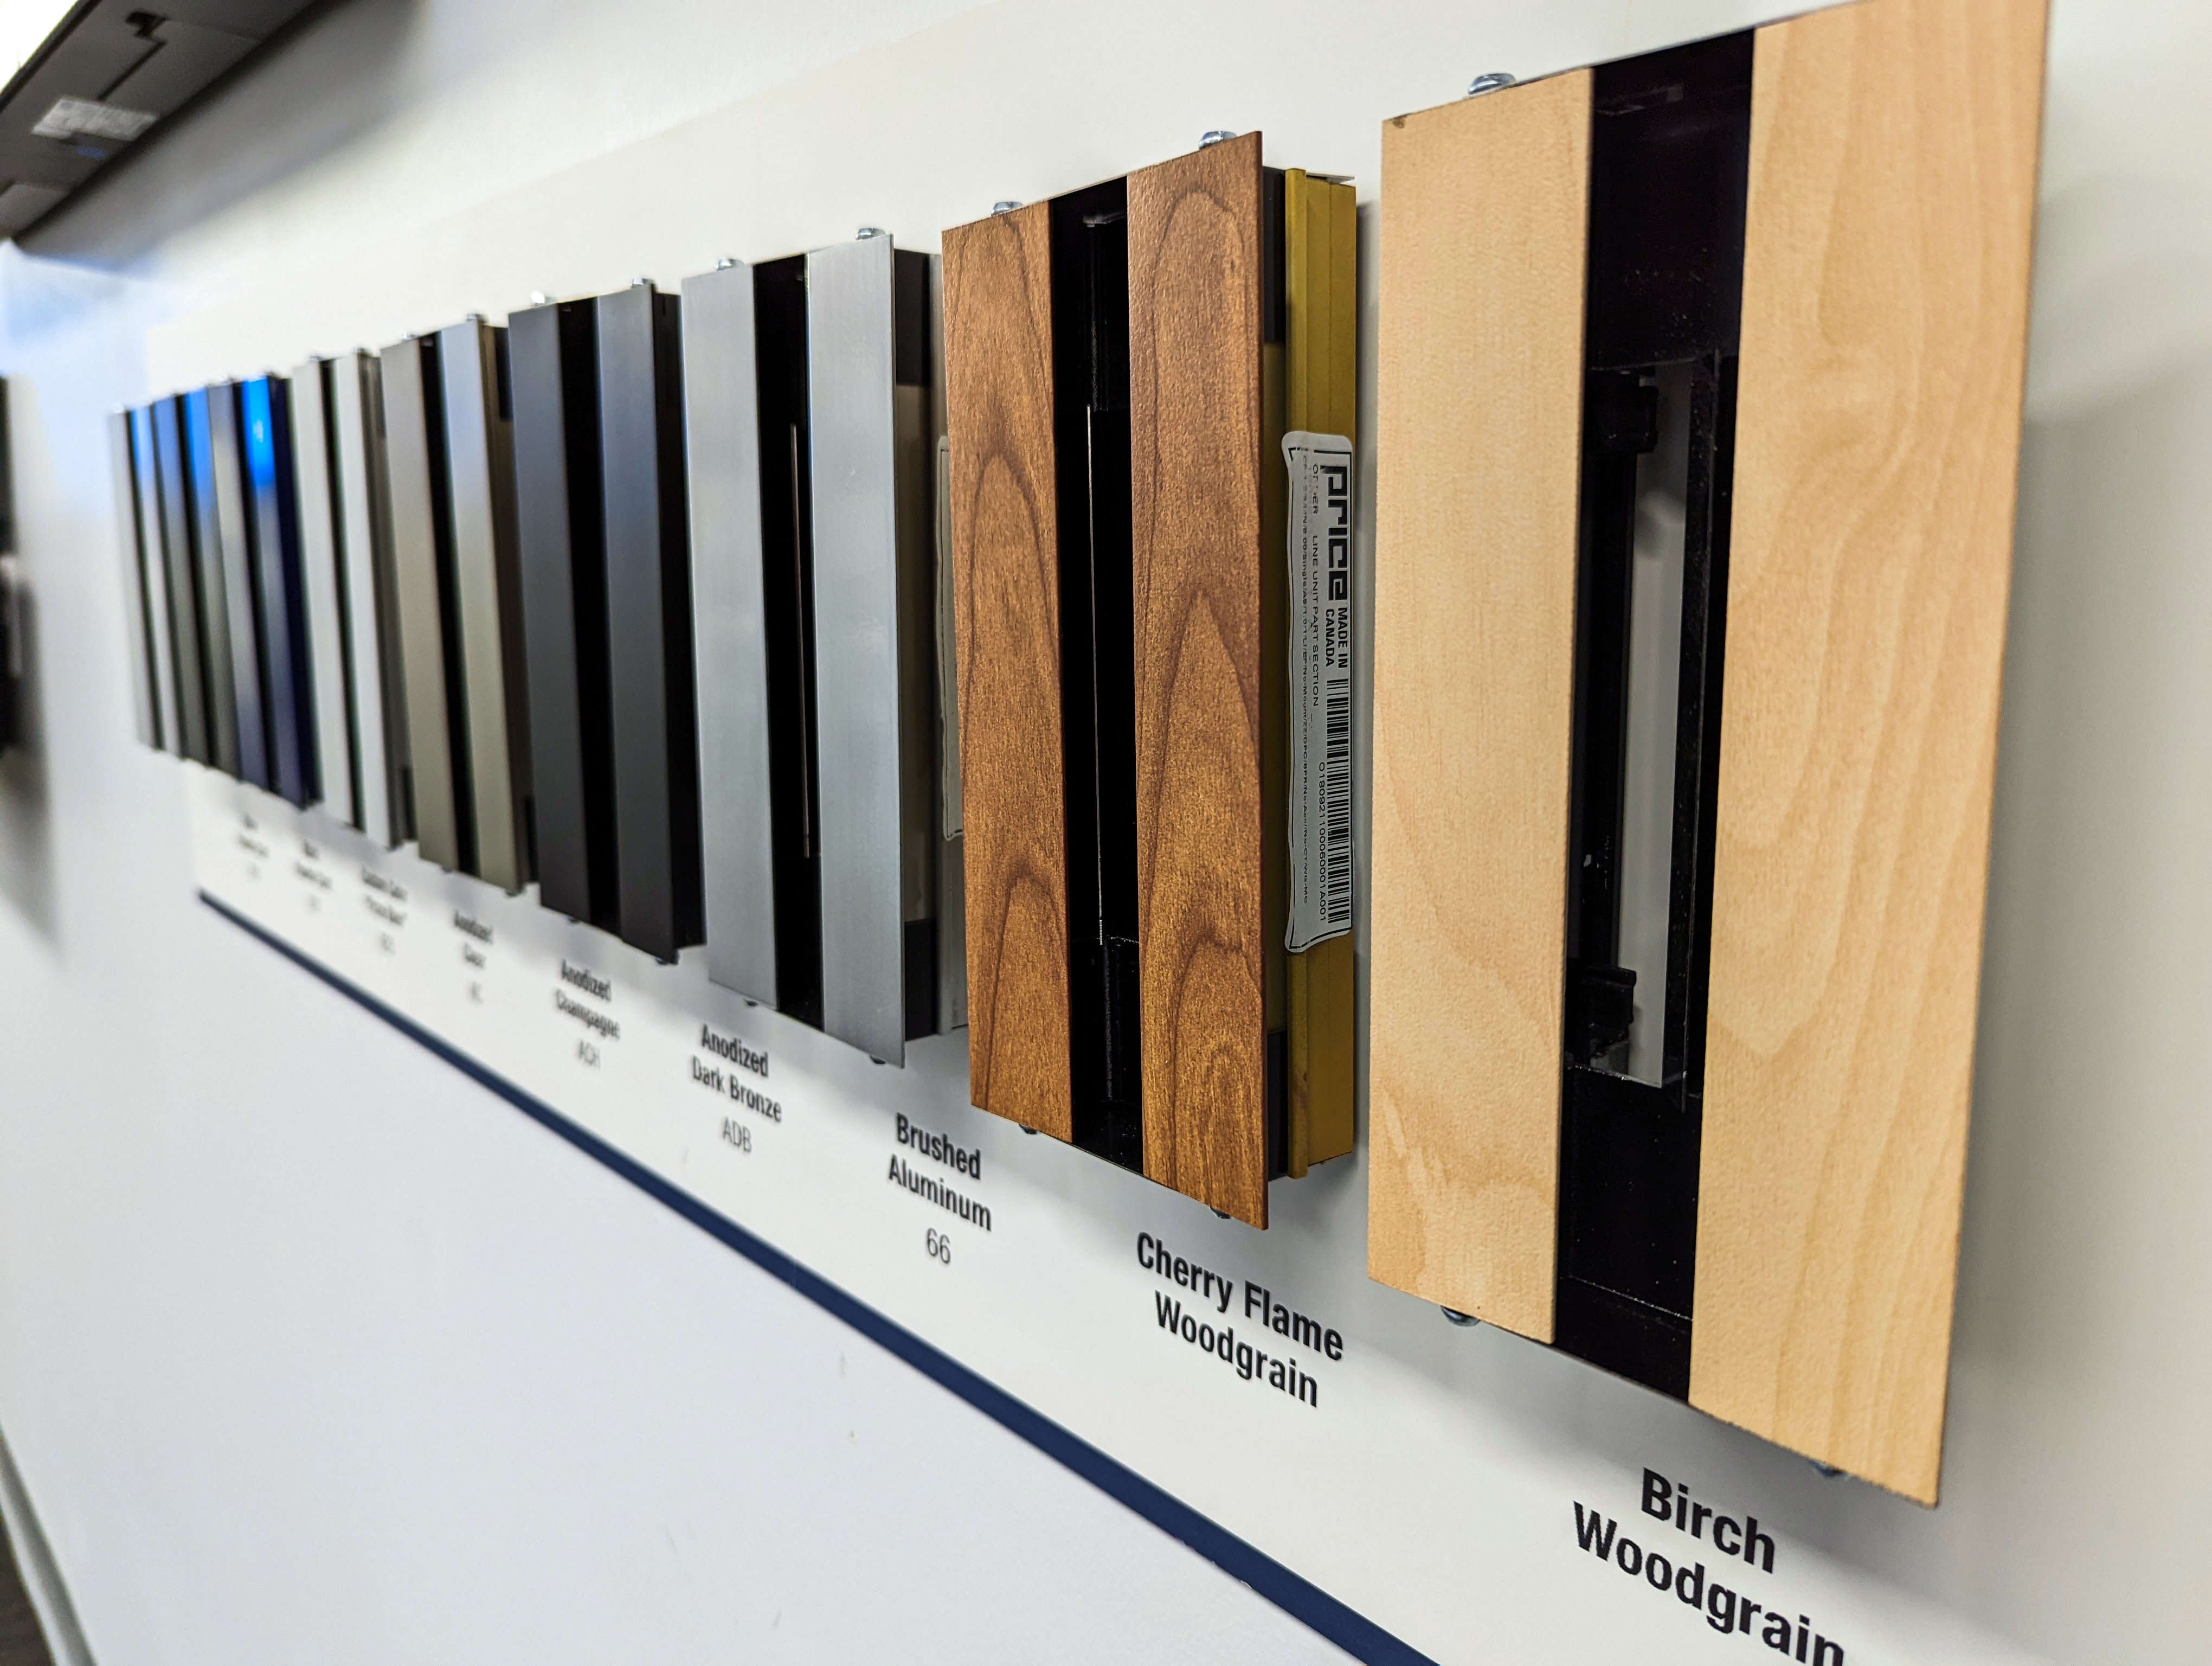 A wall display of several samples of finishes for linear slot diffusers